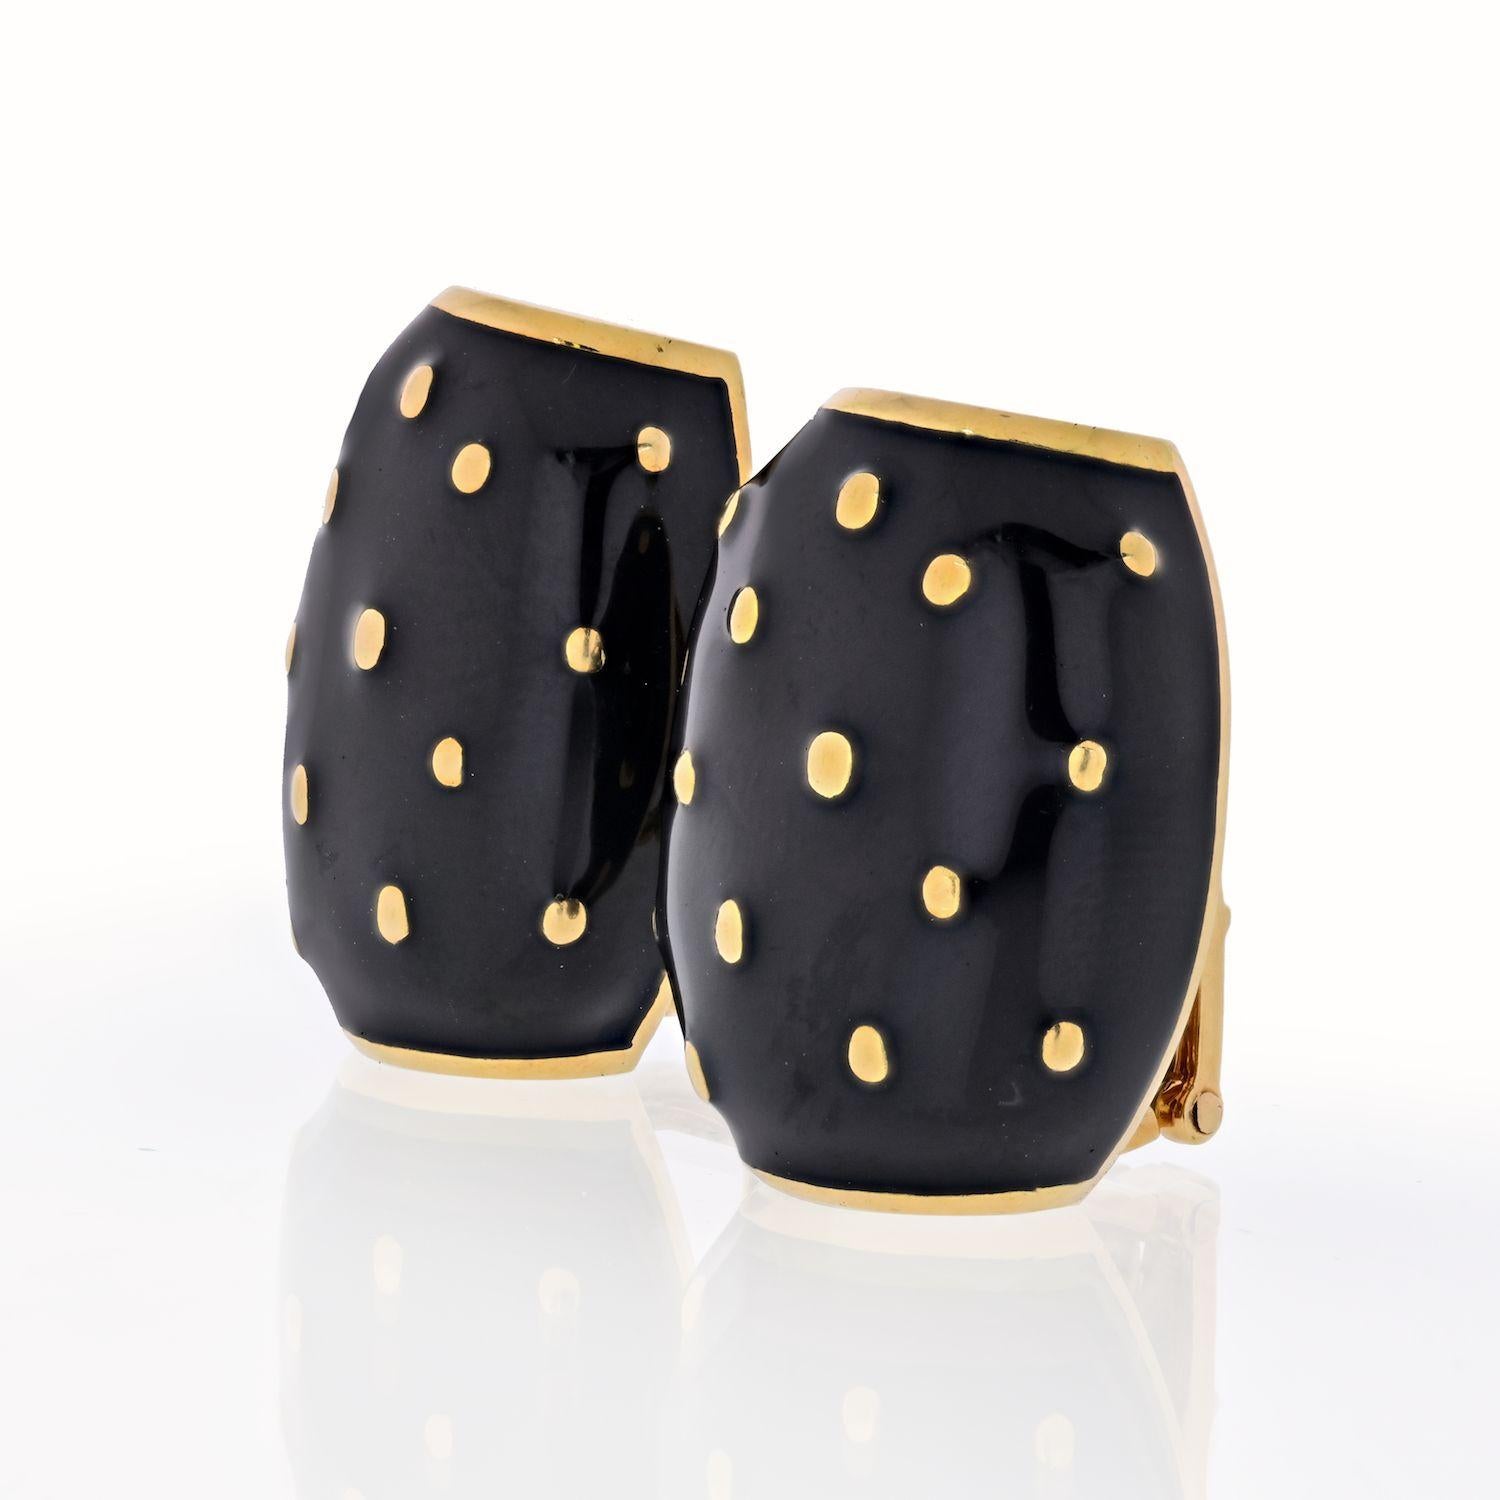 Vintage domed motif earclips, featuring black enamel with round gold spot accents, in 18k yellow gold. Stamped 'WEBB' Circa 1970s.
Clip Earrings.
Length: 25mm 
Width: 20mm.